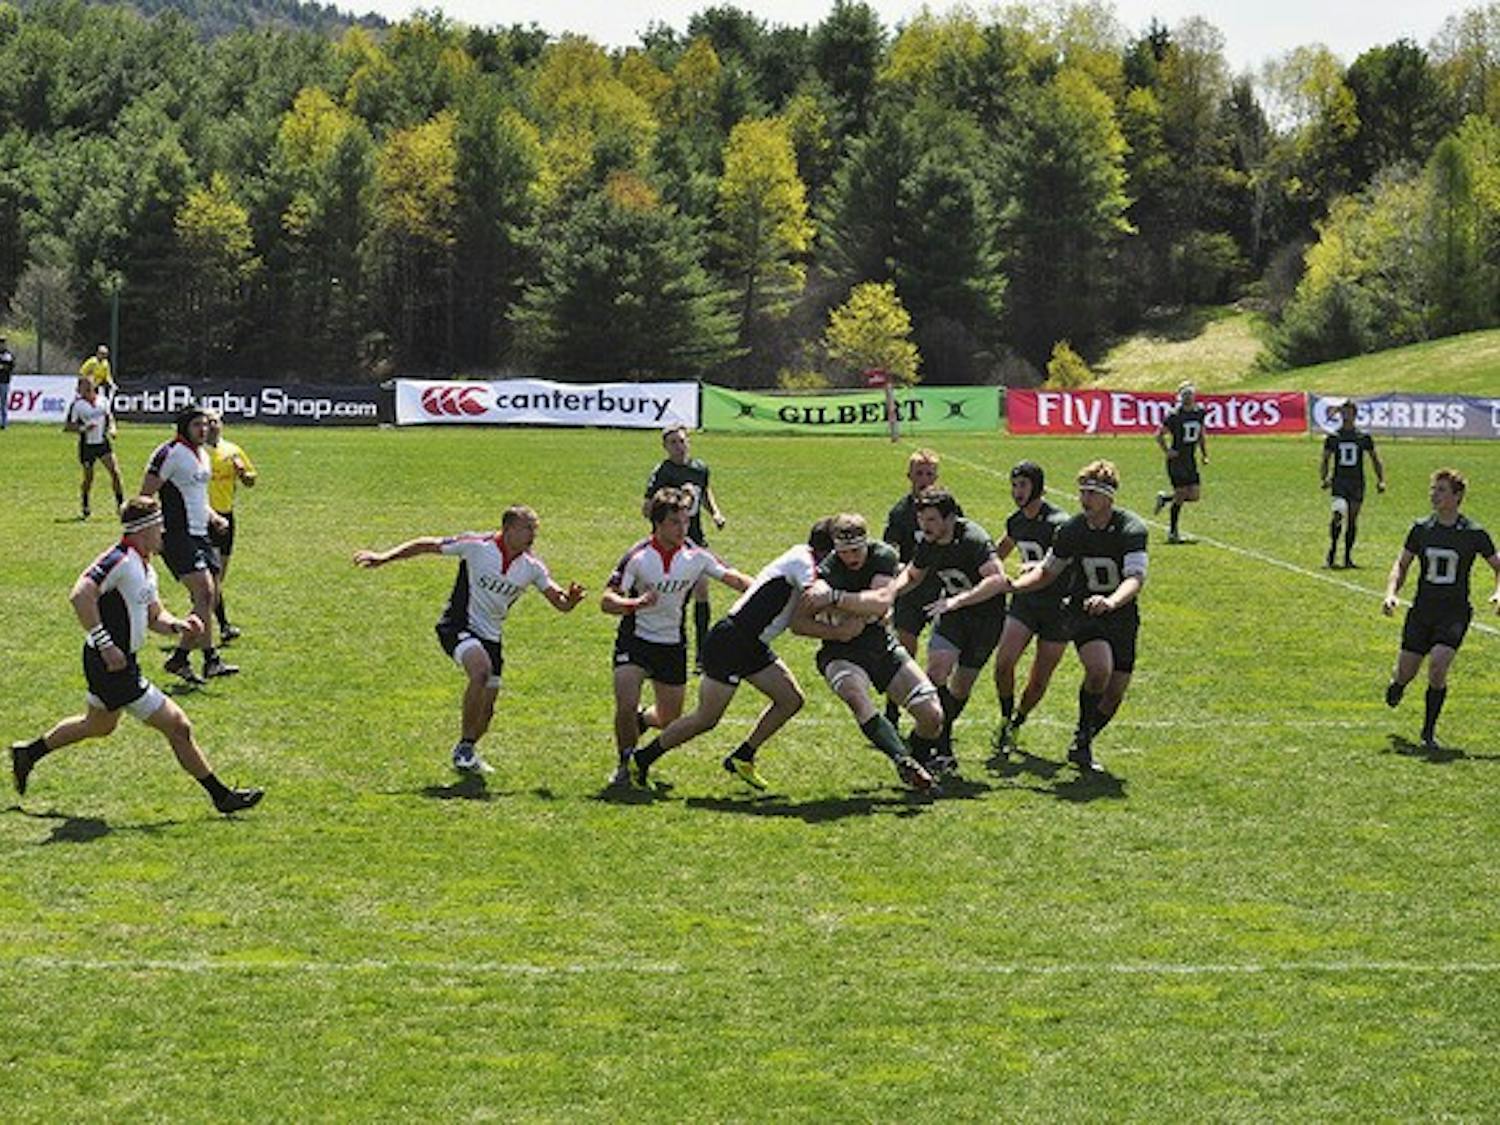 The Dartmouth men's rugby team will face Davenport University in the Division I-AA National Championship semifinal on Friday.